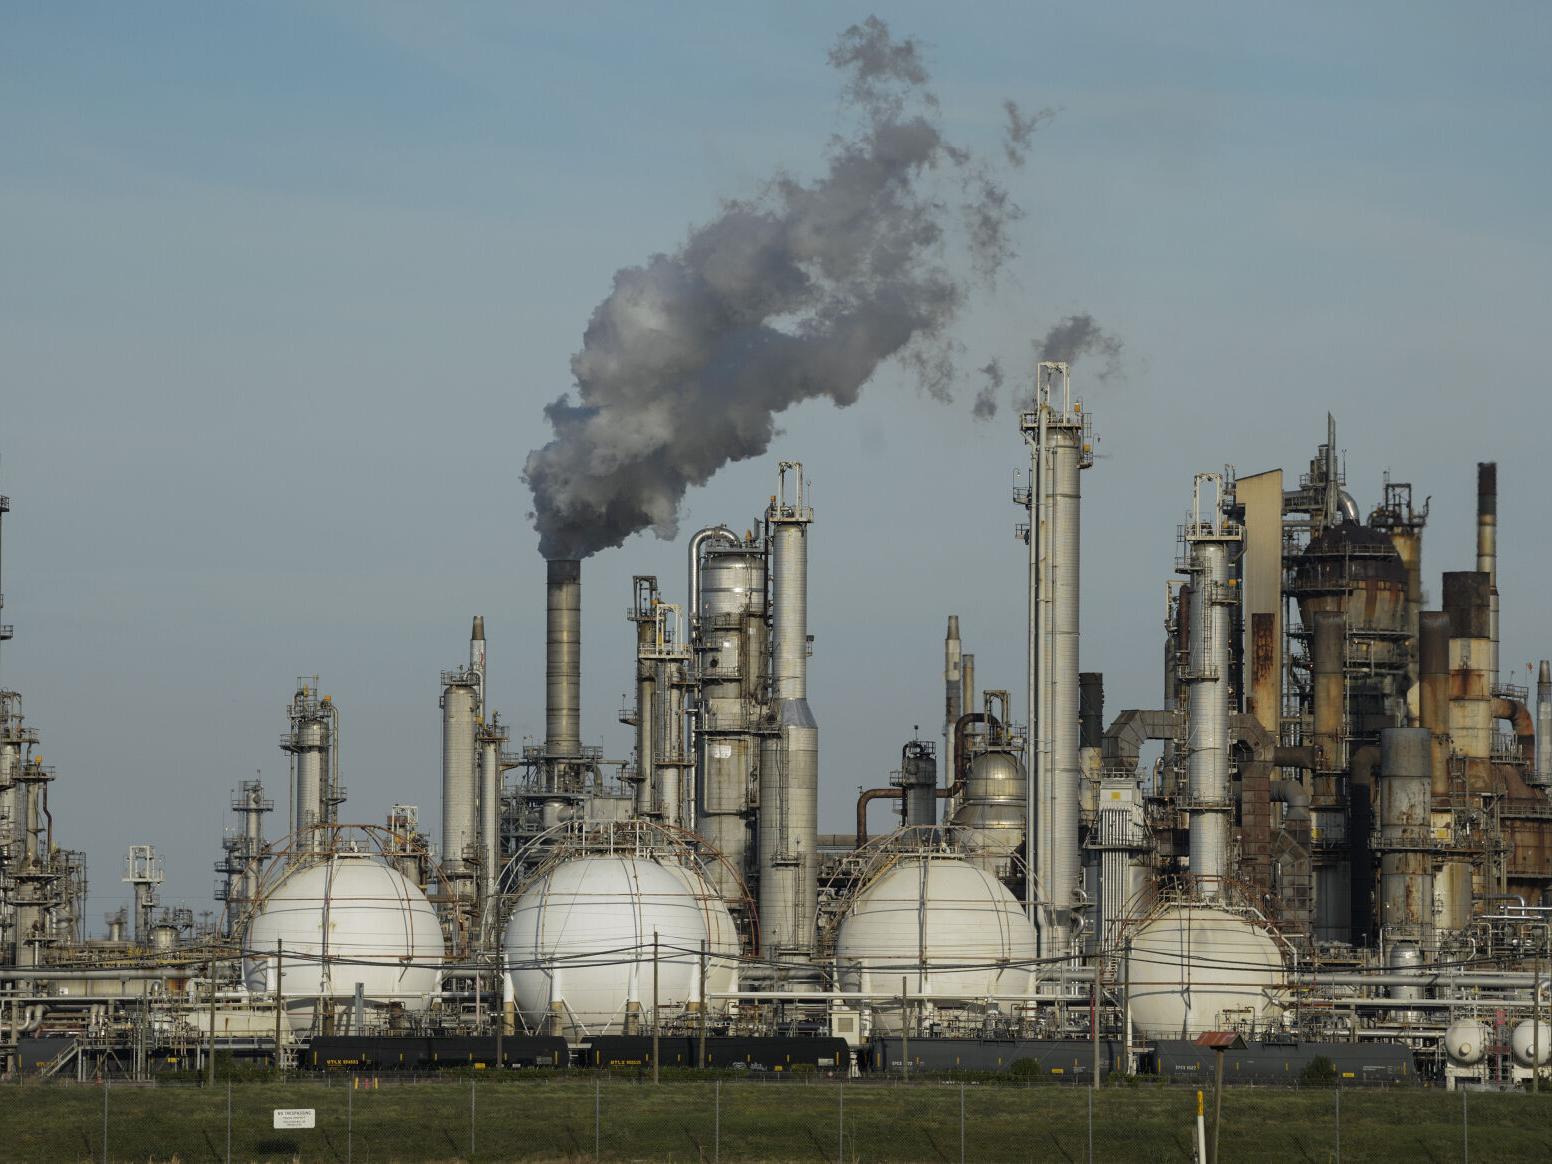 $1 billion refinery bid rebuffed by Shell for shuttered Convent site in  Louisiana, group says | Business | theadvocate.com